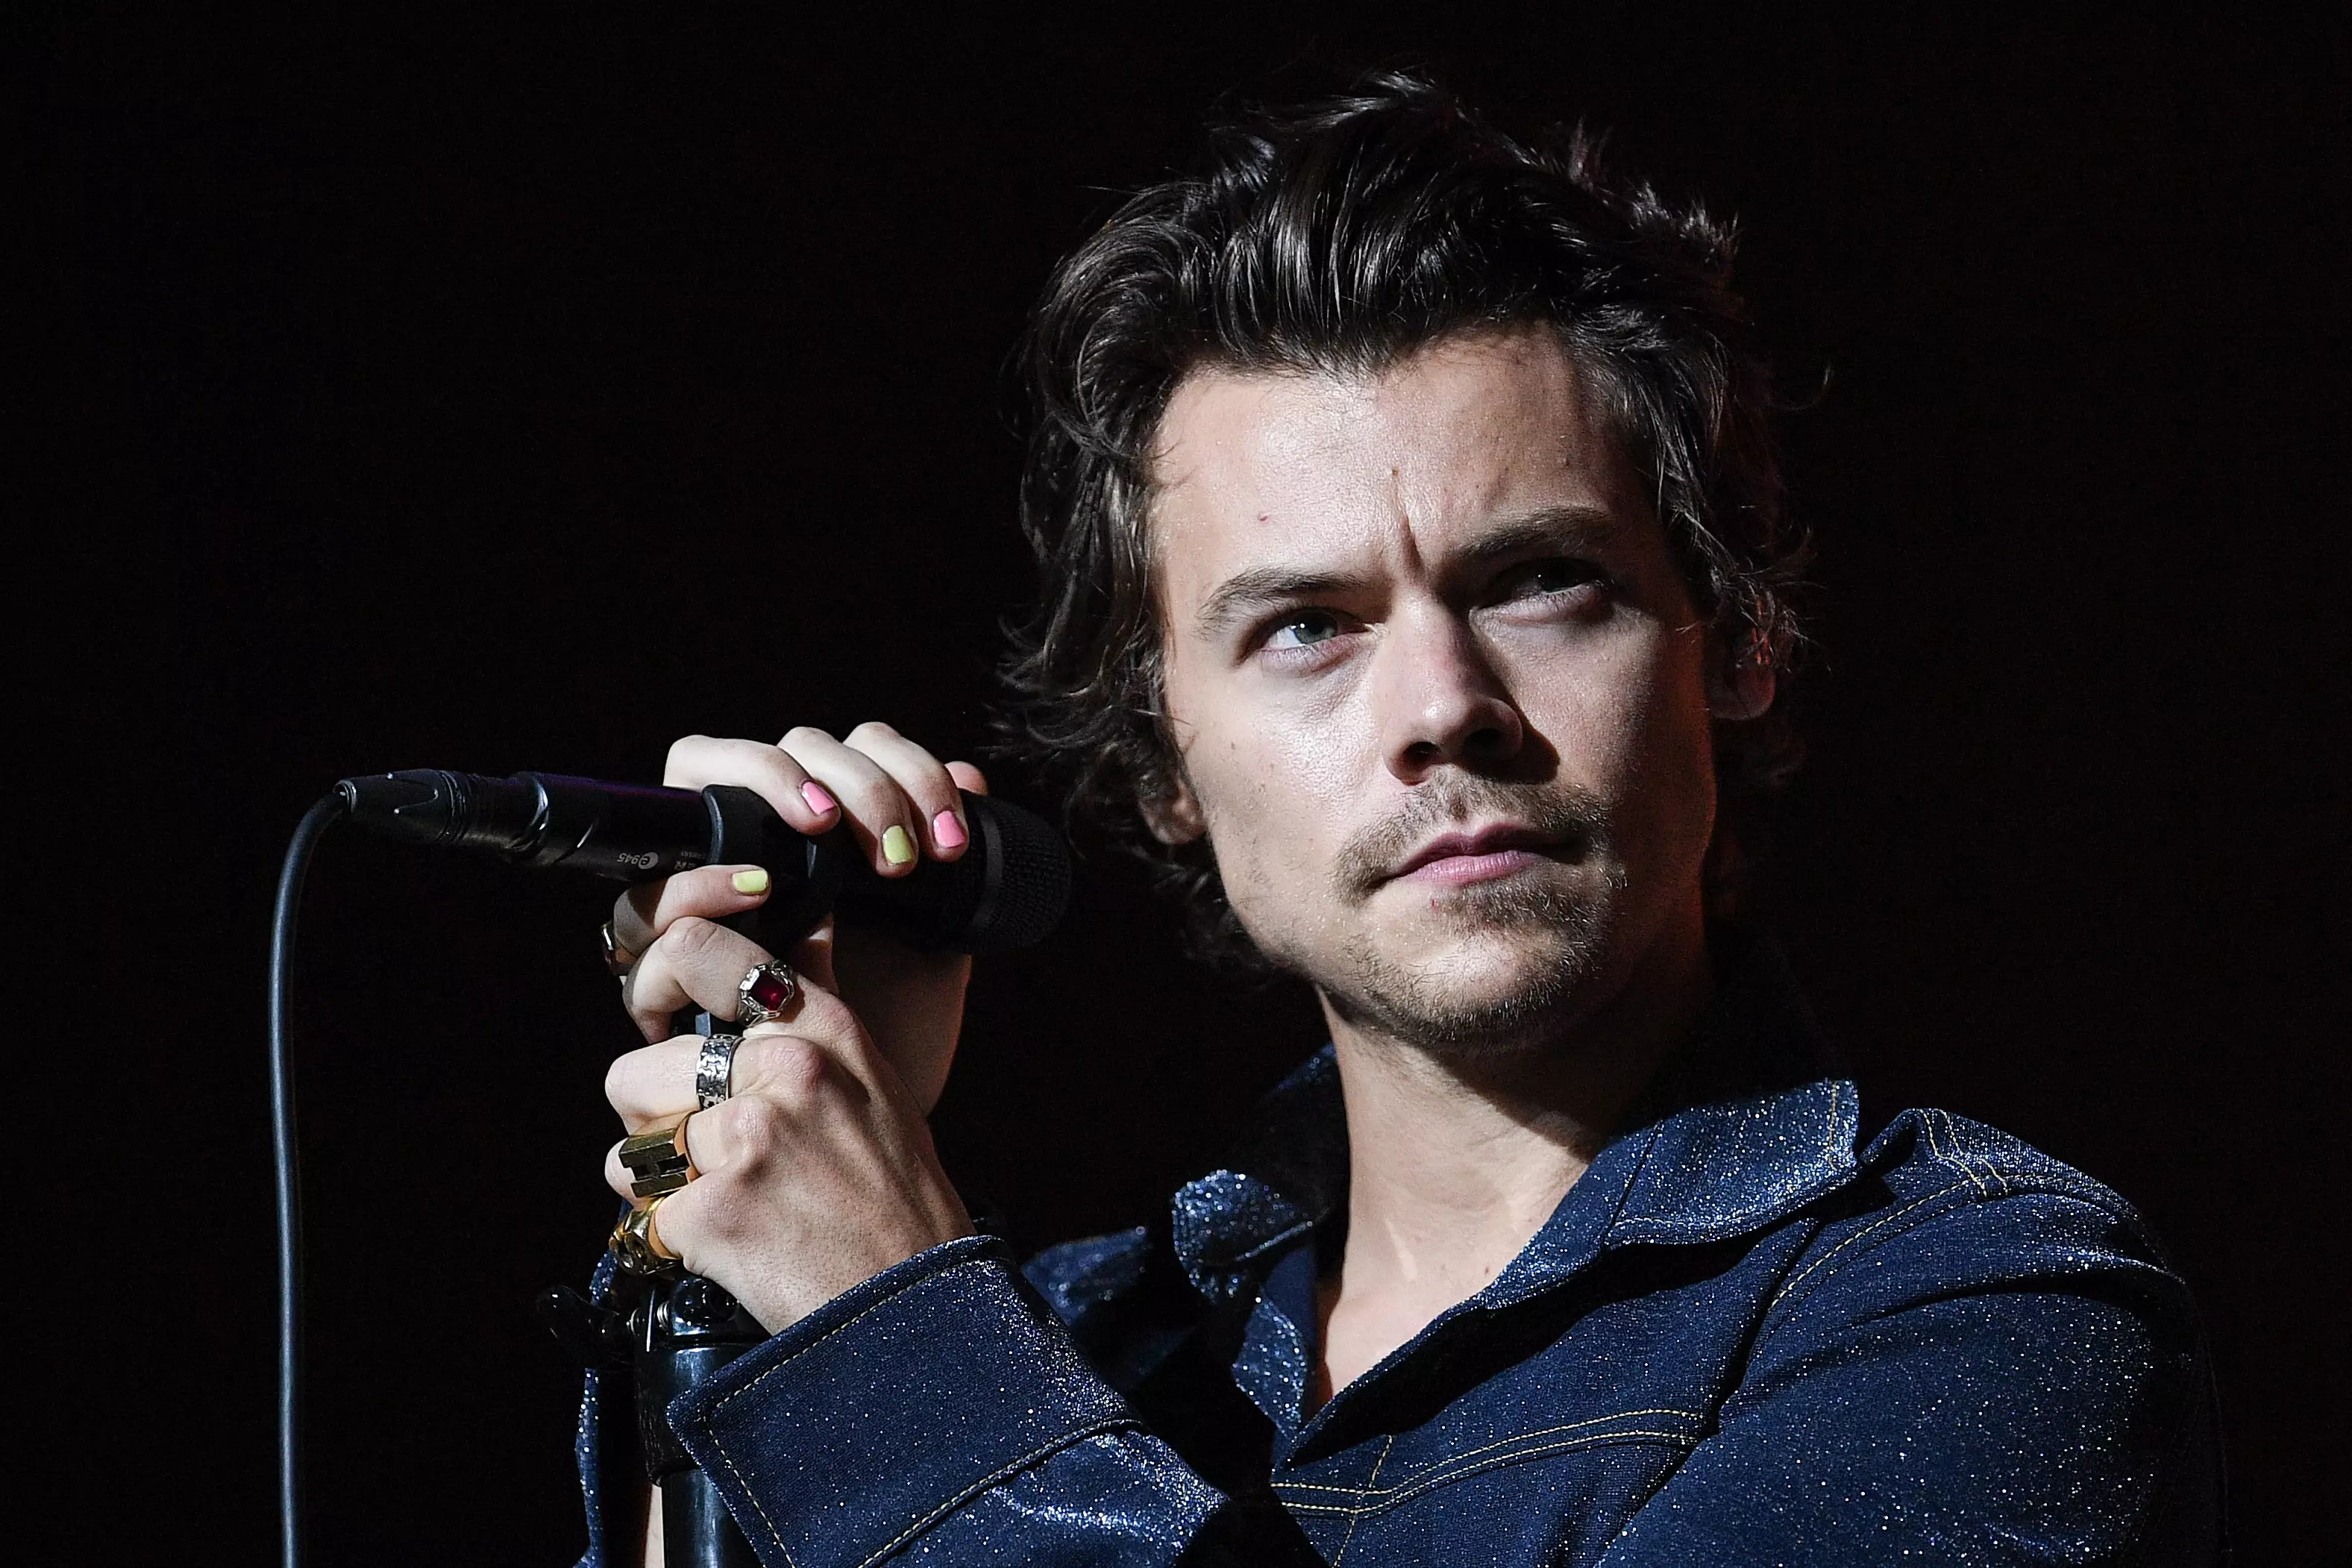 Fans think the Starbucks worker looks exactly like Harry Styles (